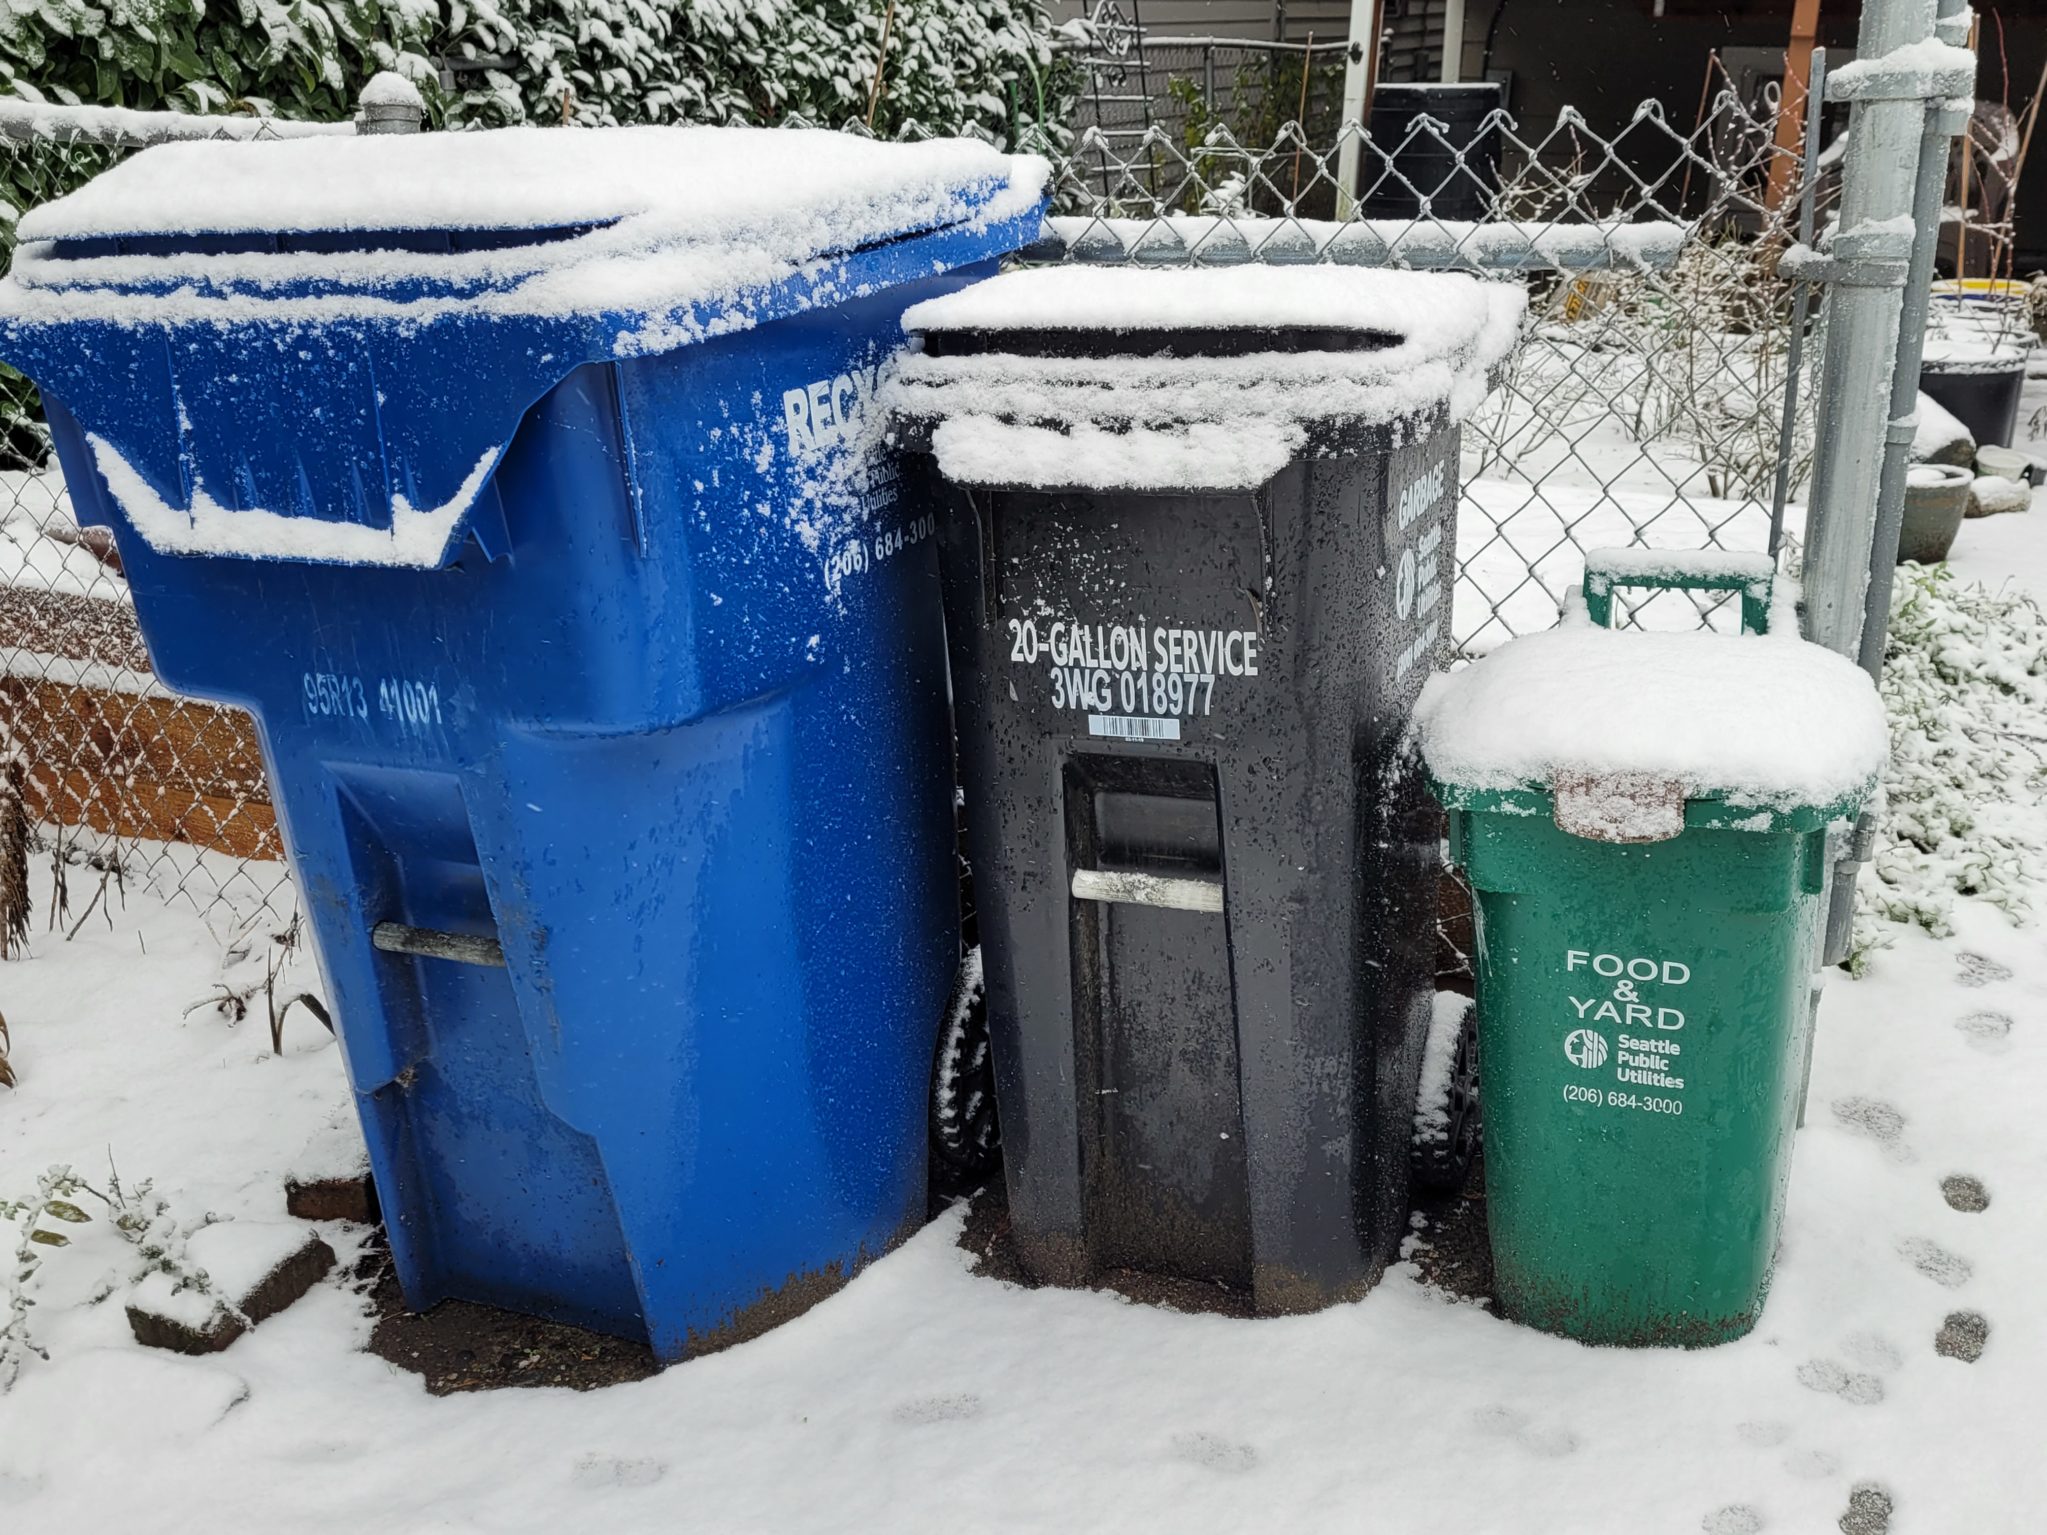 Recycling, garbage, and compost bins covered in snow.